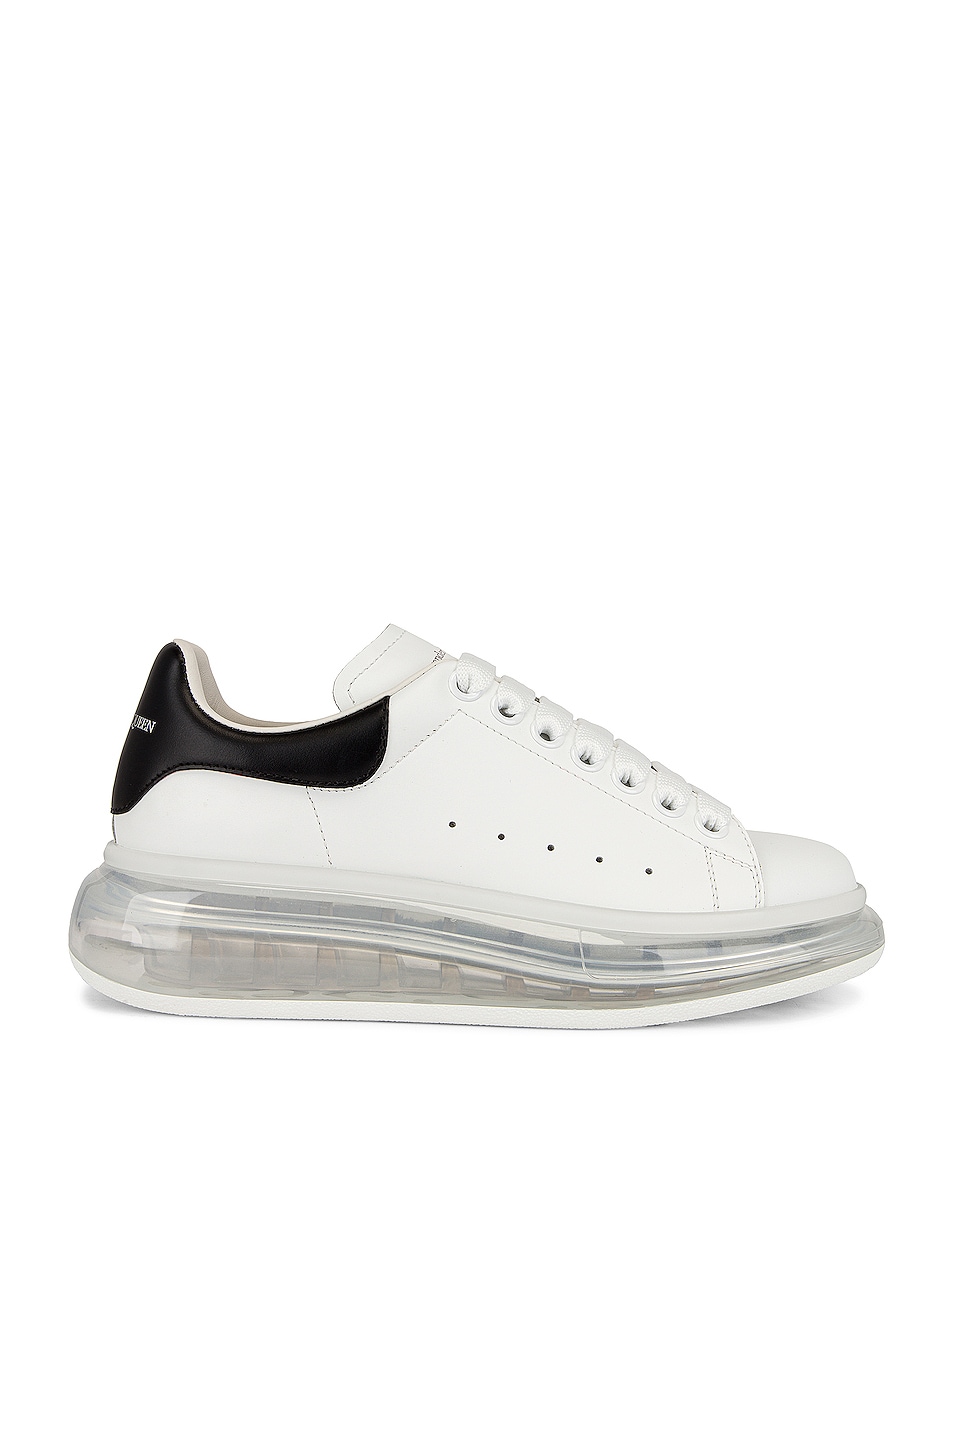 Image 1 of Alexander McQueen Lace Up Sneakers in White & Black